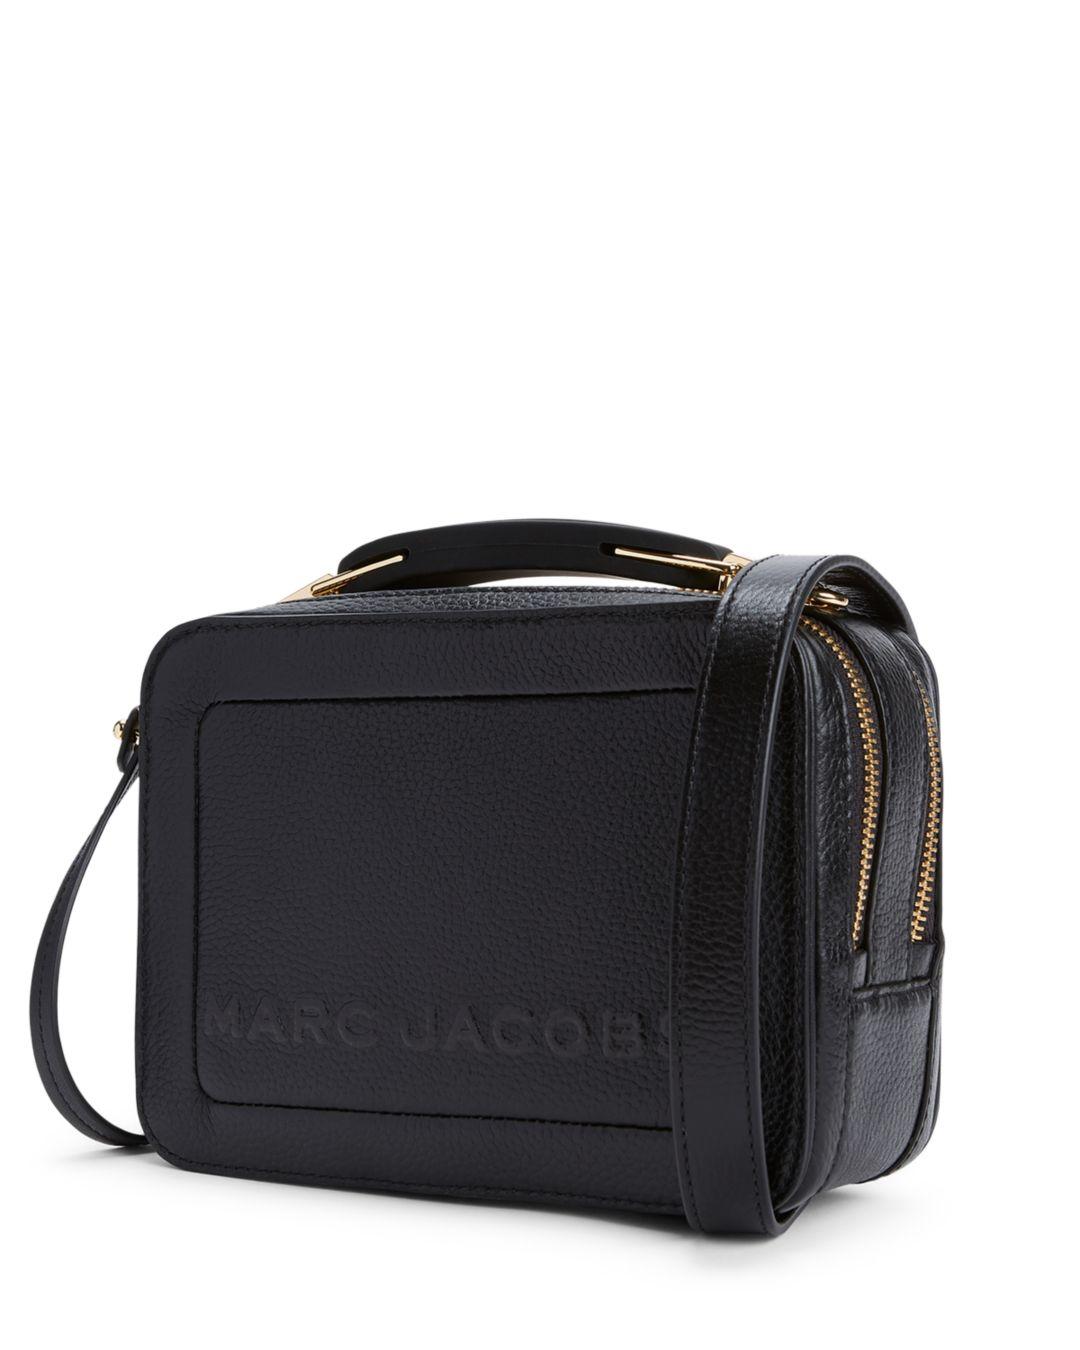 Marc Jacobs Leather The Box 20 Crossbody in Black/Gold (Black) - Lyst